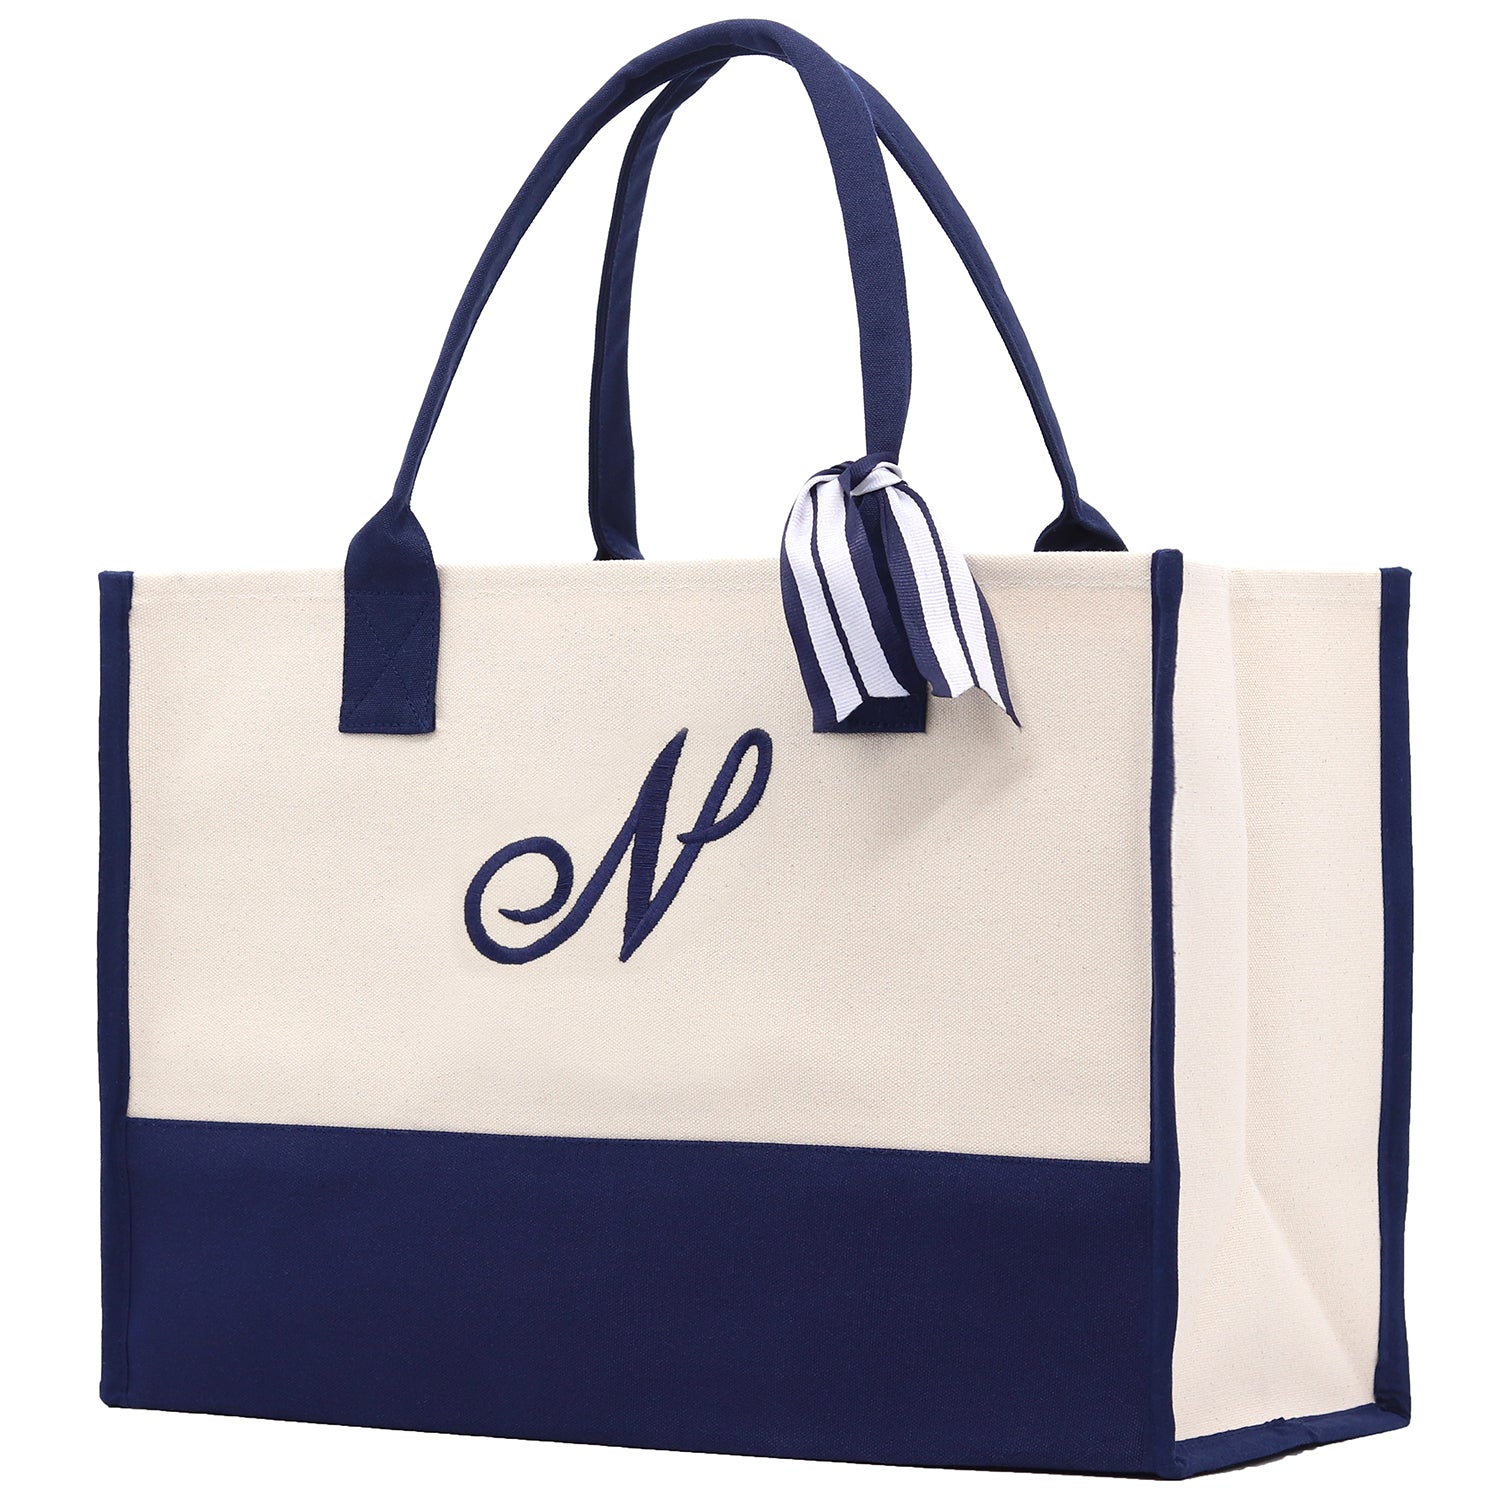 Monogram Tote Bag with 100% Cotton Canvas and a Chic Personalized Monogram Navy Blue Vanessa Rosella Script N 